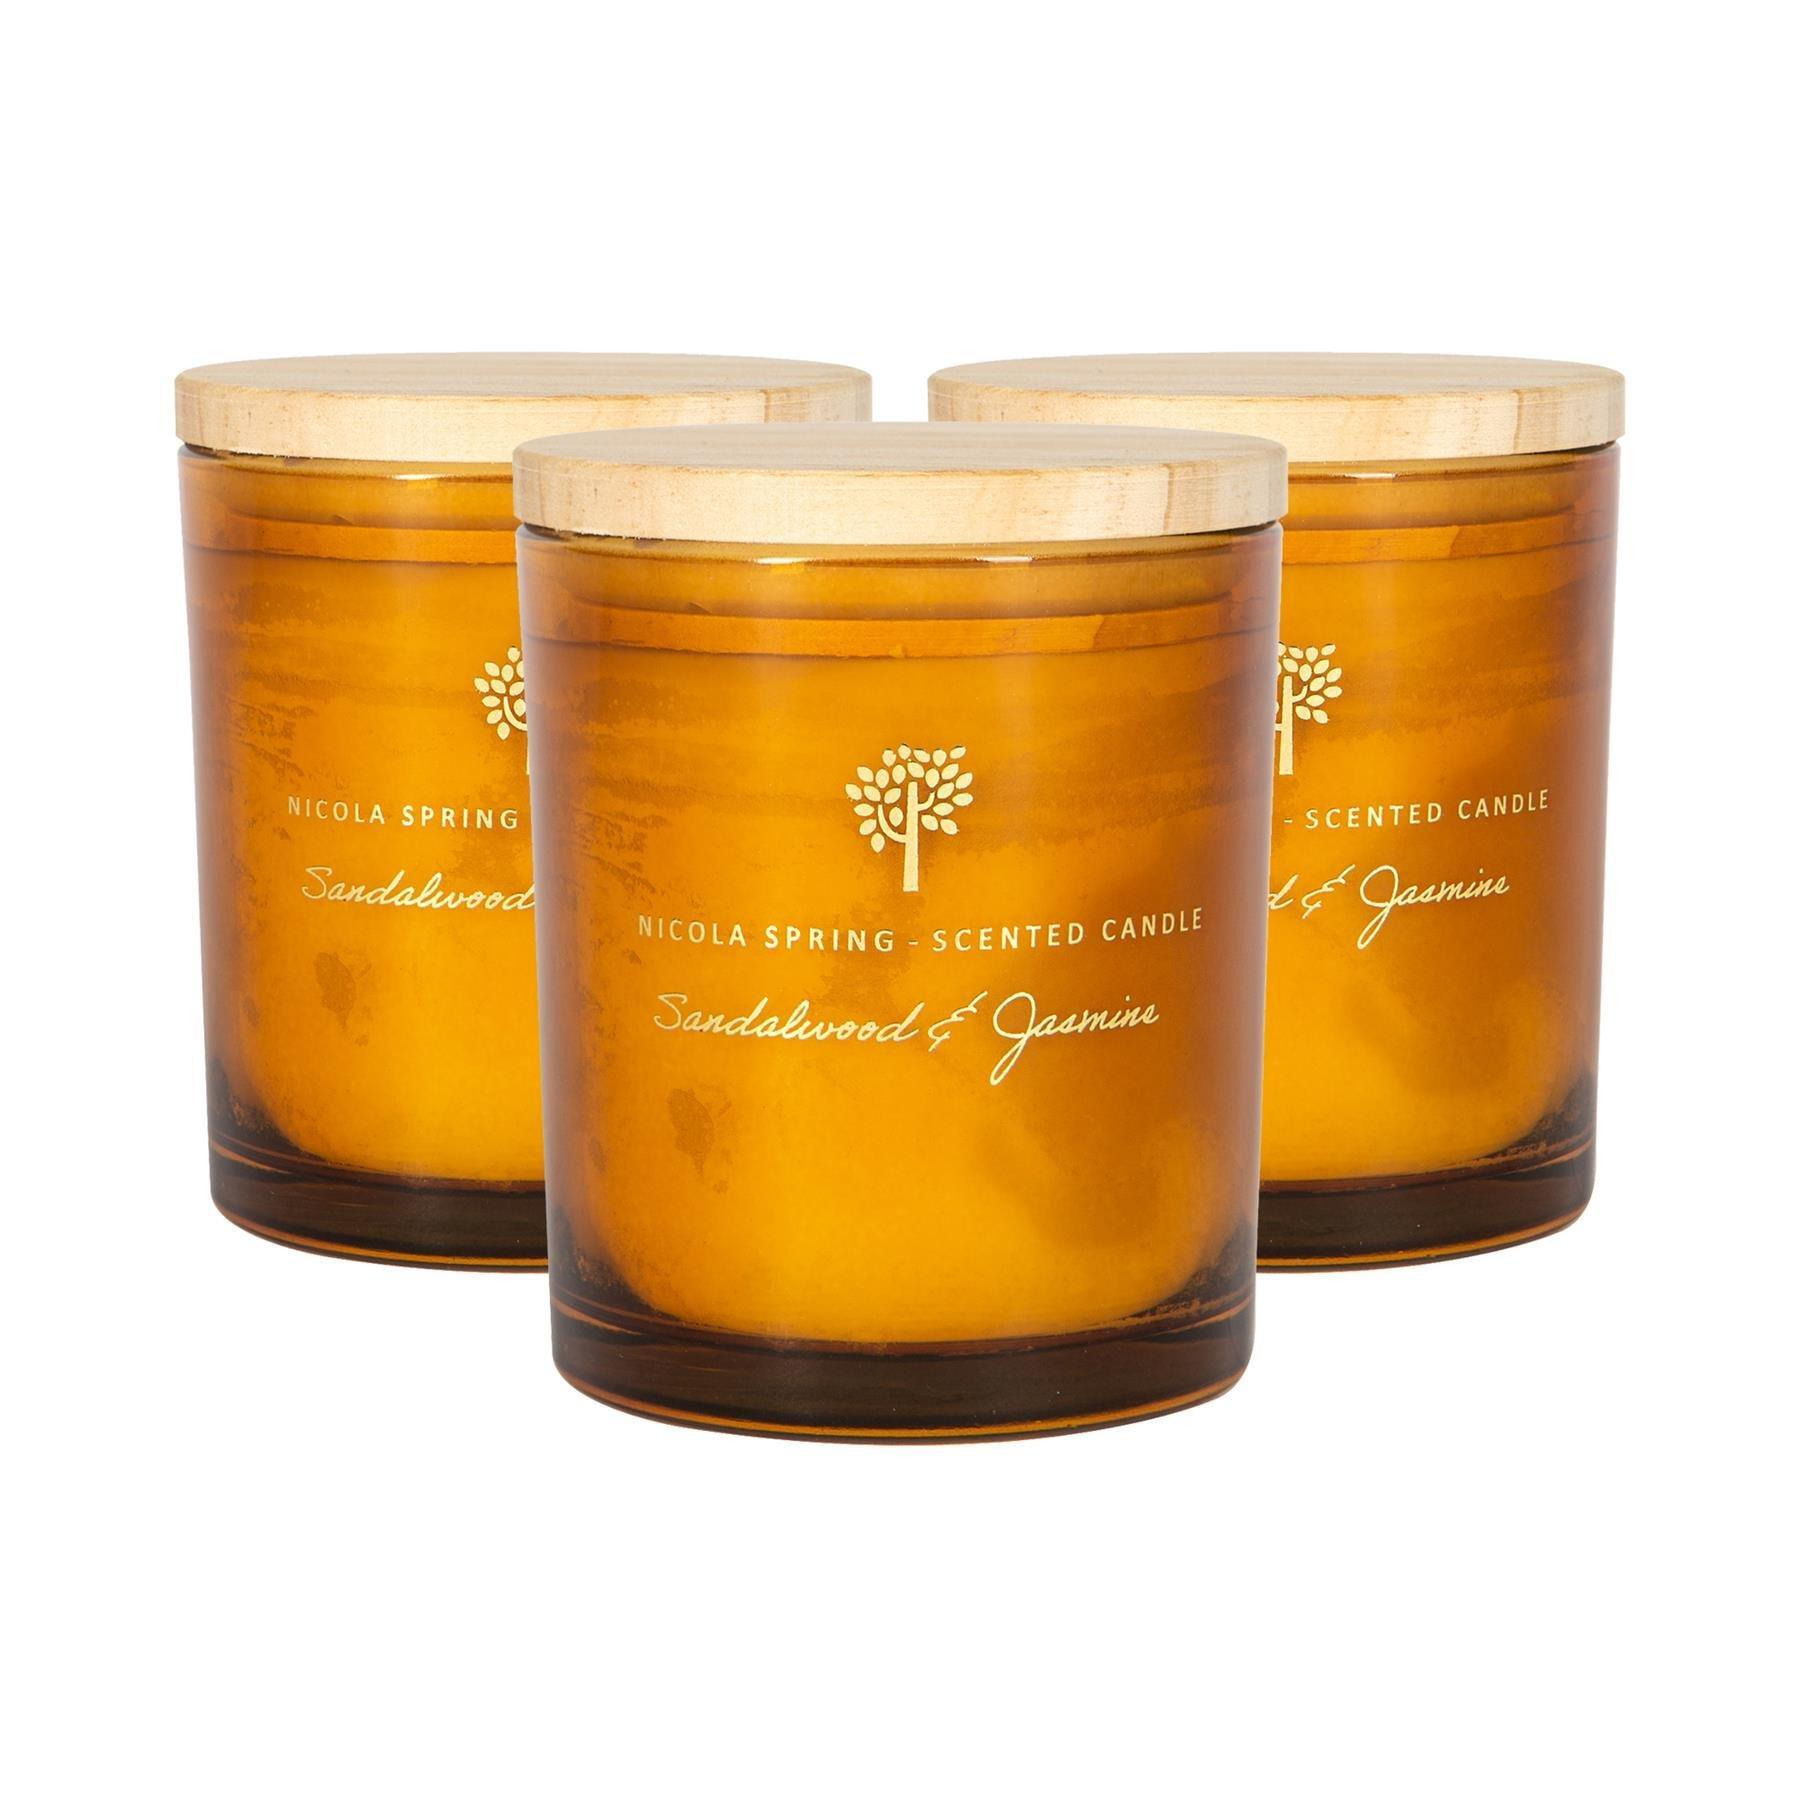 Soy Wax Scented Candles 130g Sandalwood & Jasmine Pack of 3 - image 1